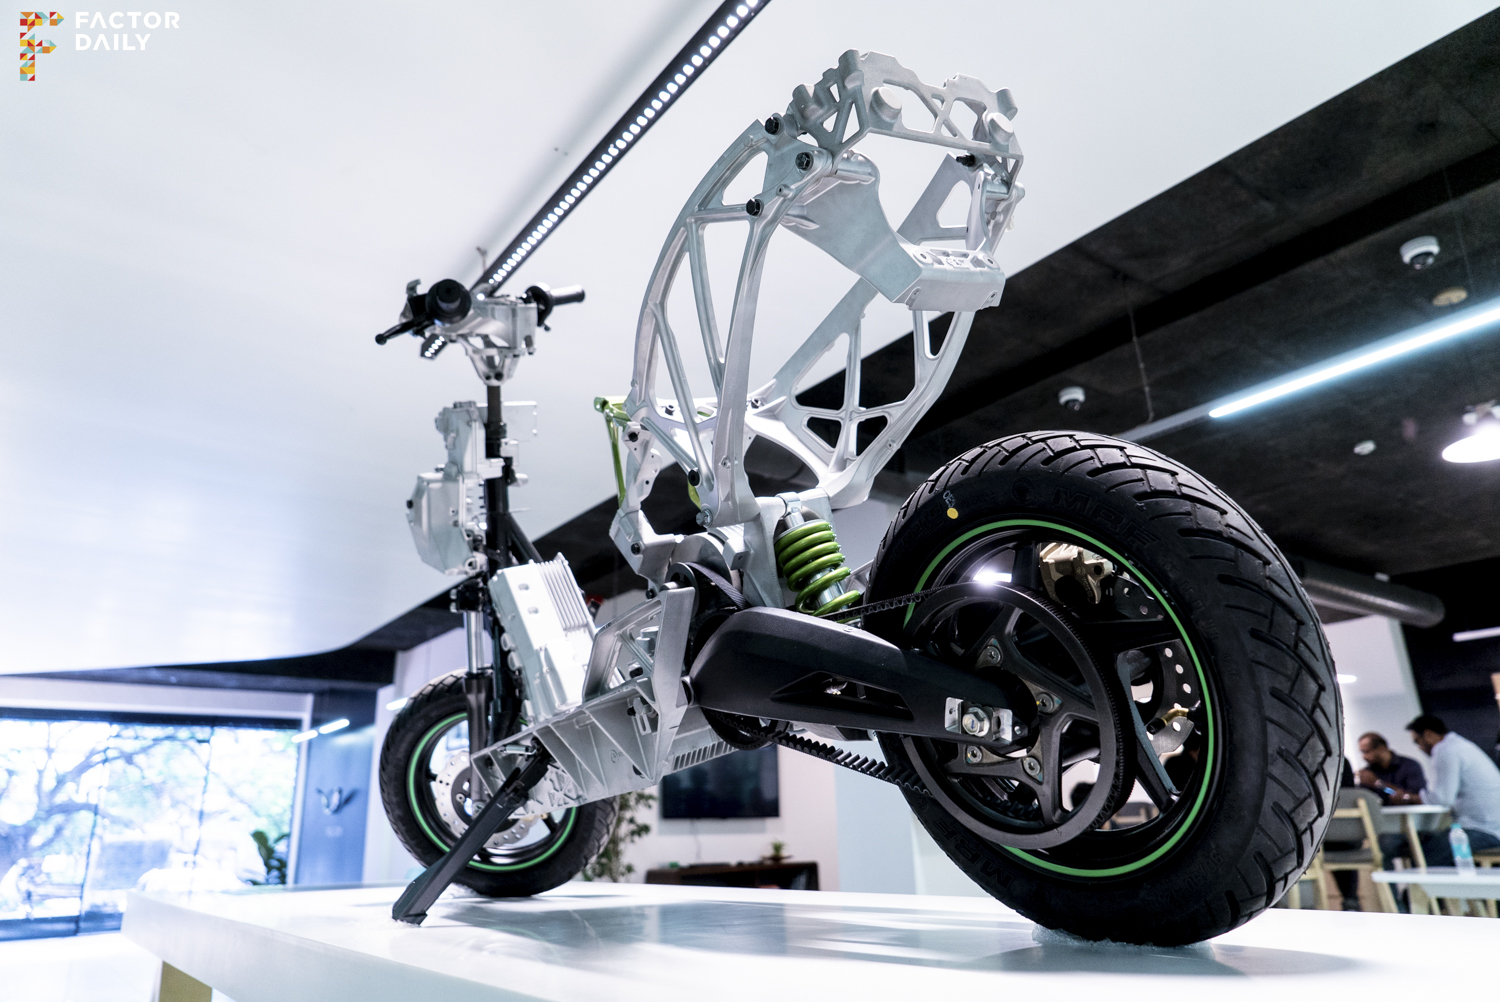 The electric scooter's exposed frame displayed at the Ather's experience center in Indiranagar